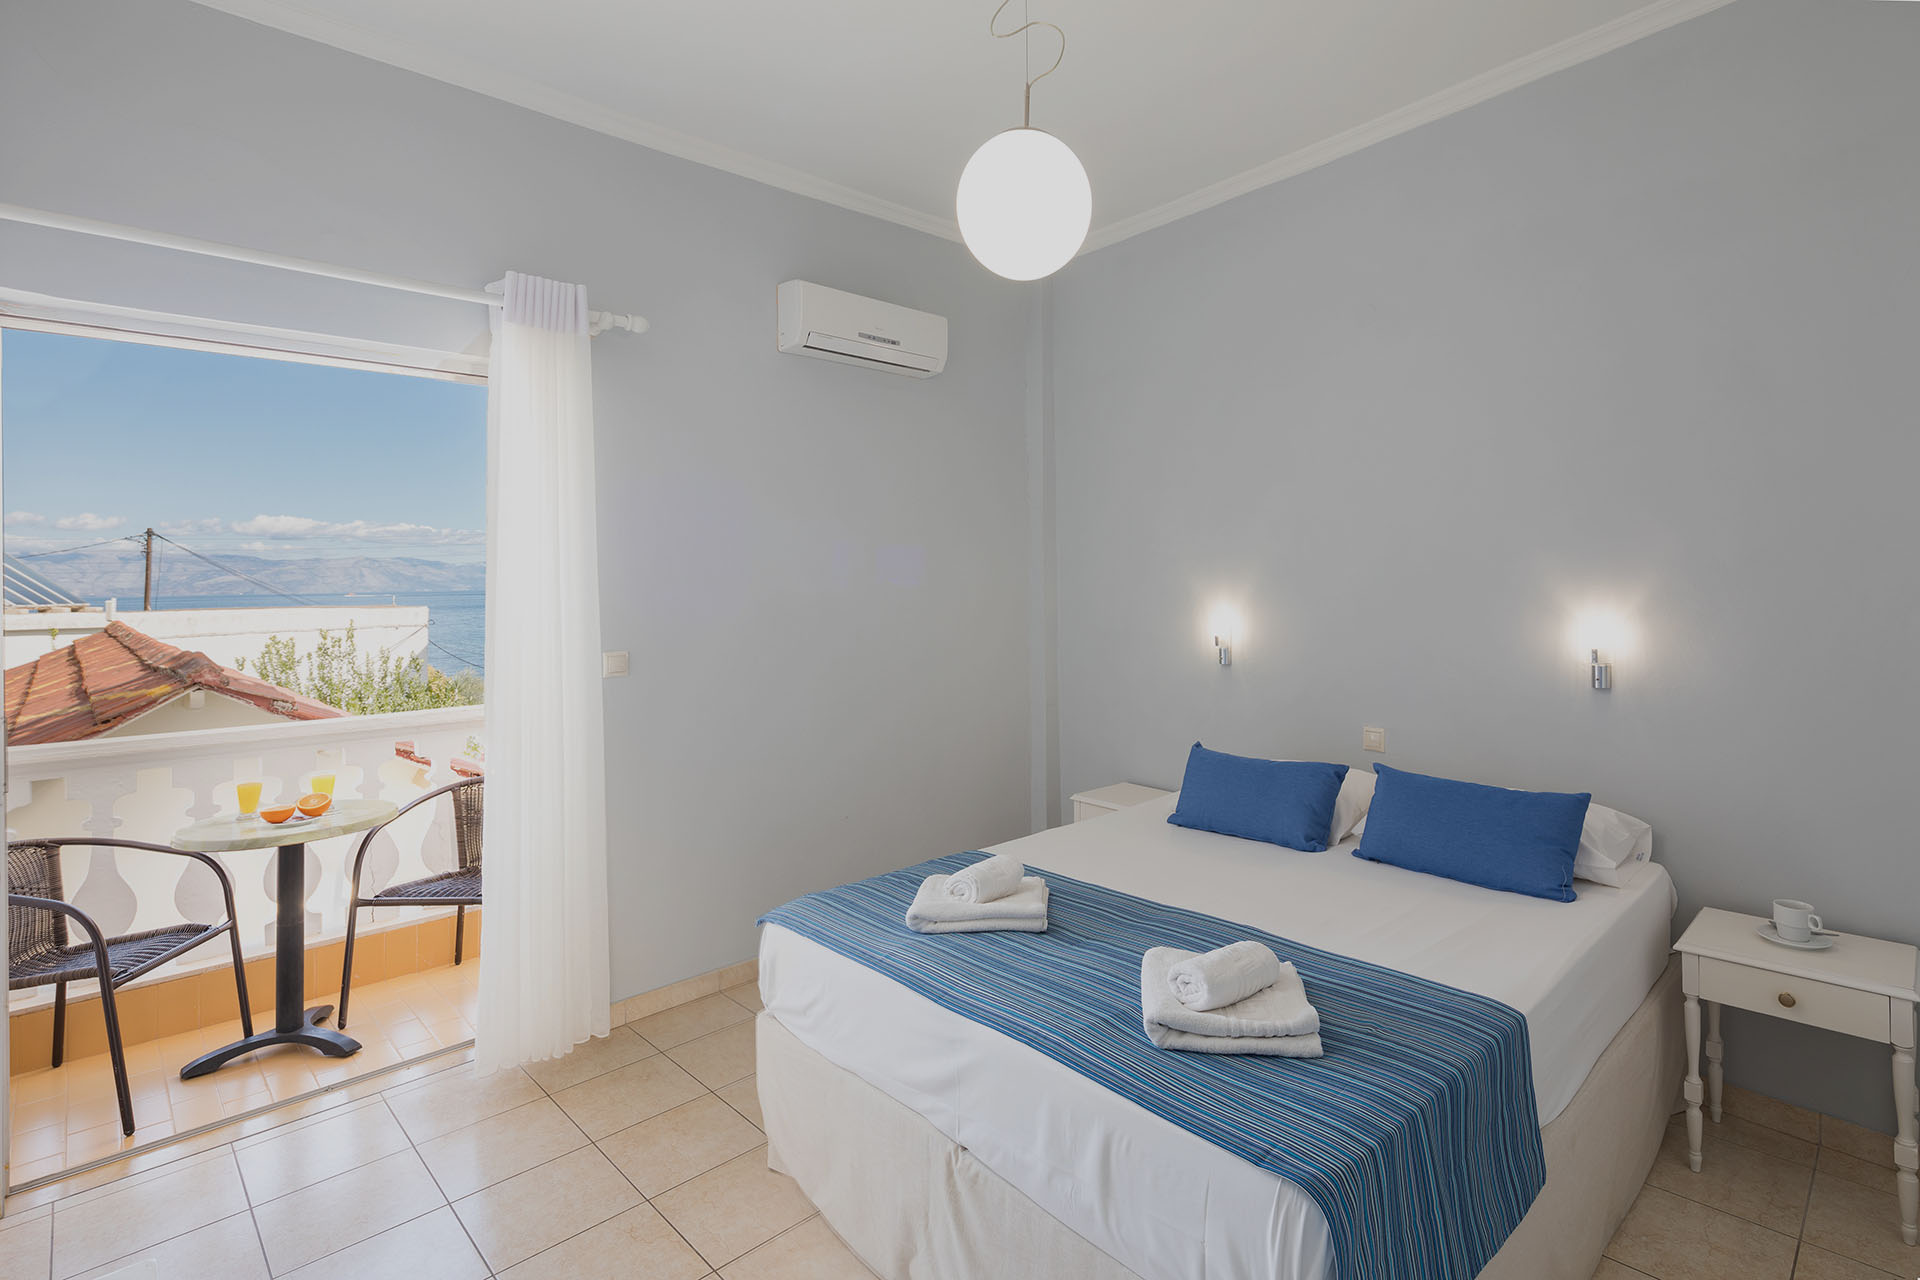 Accommodation for couples in Corfu